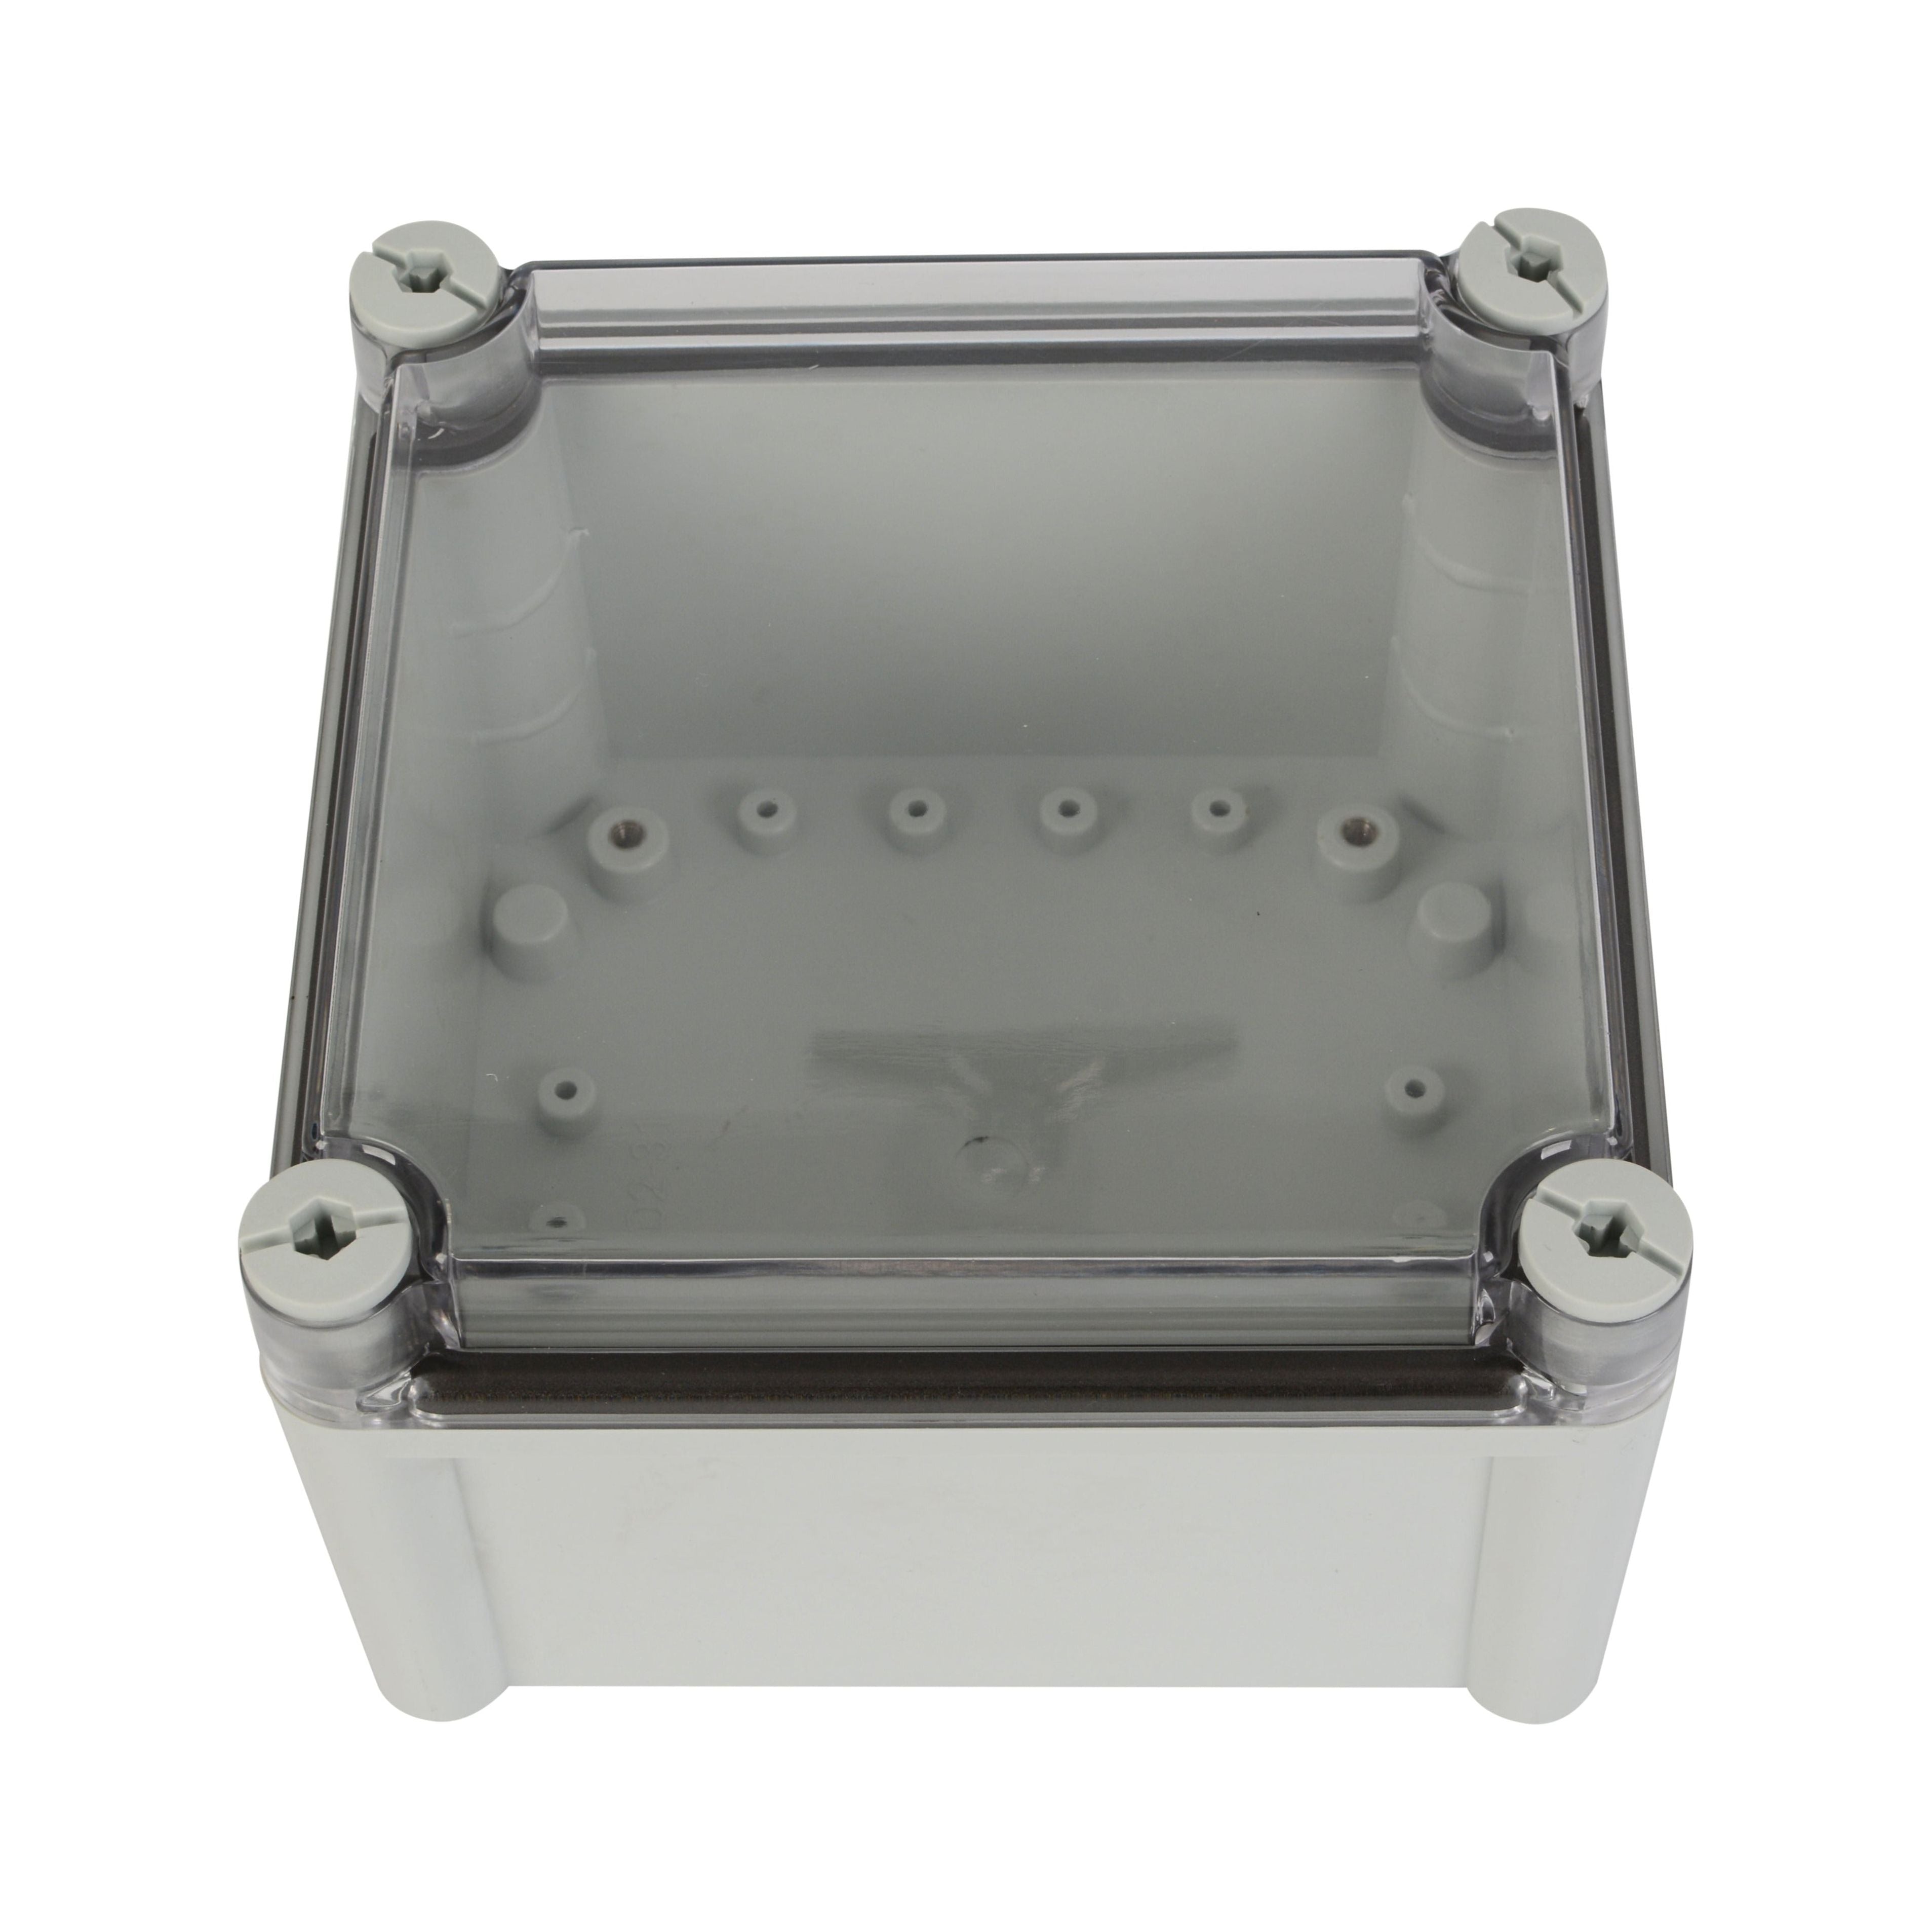 ABS IP66 Clear Lid Junction Box 190 x 190 x 130mm